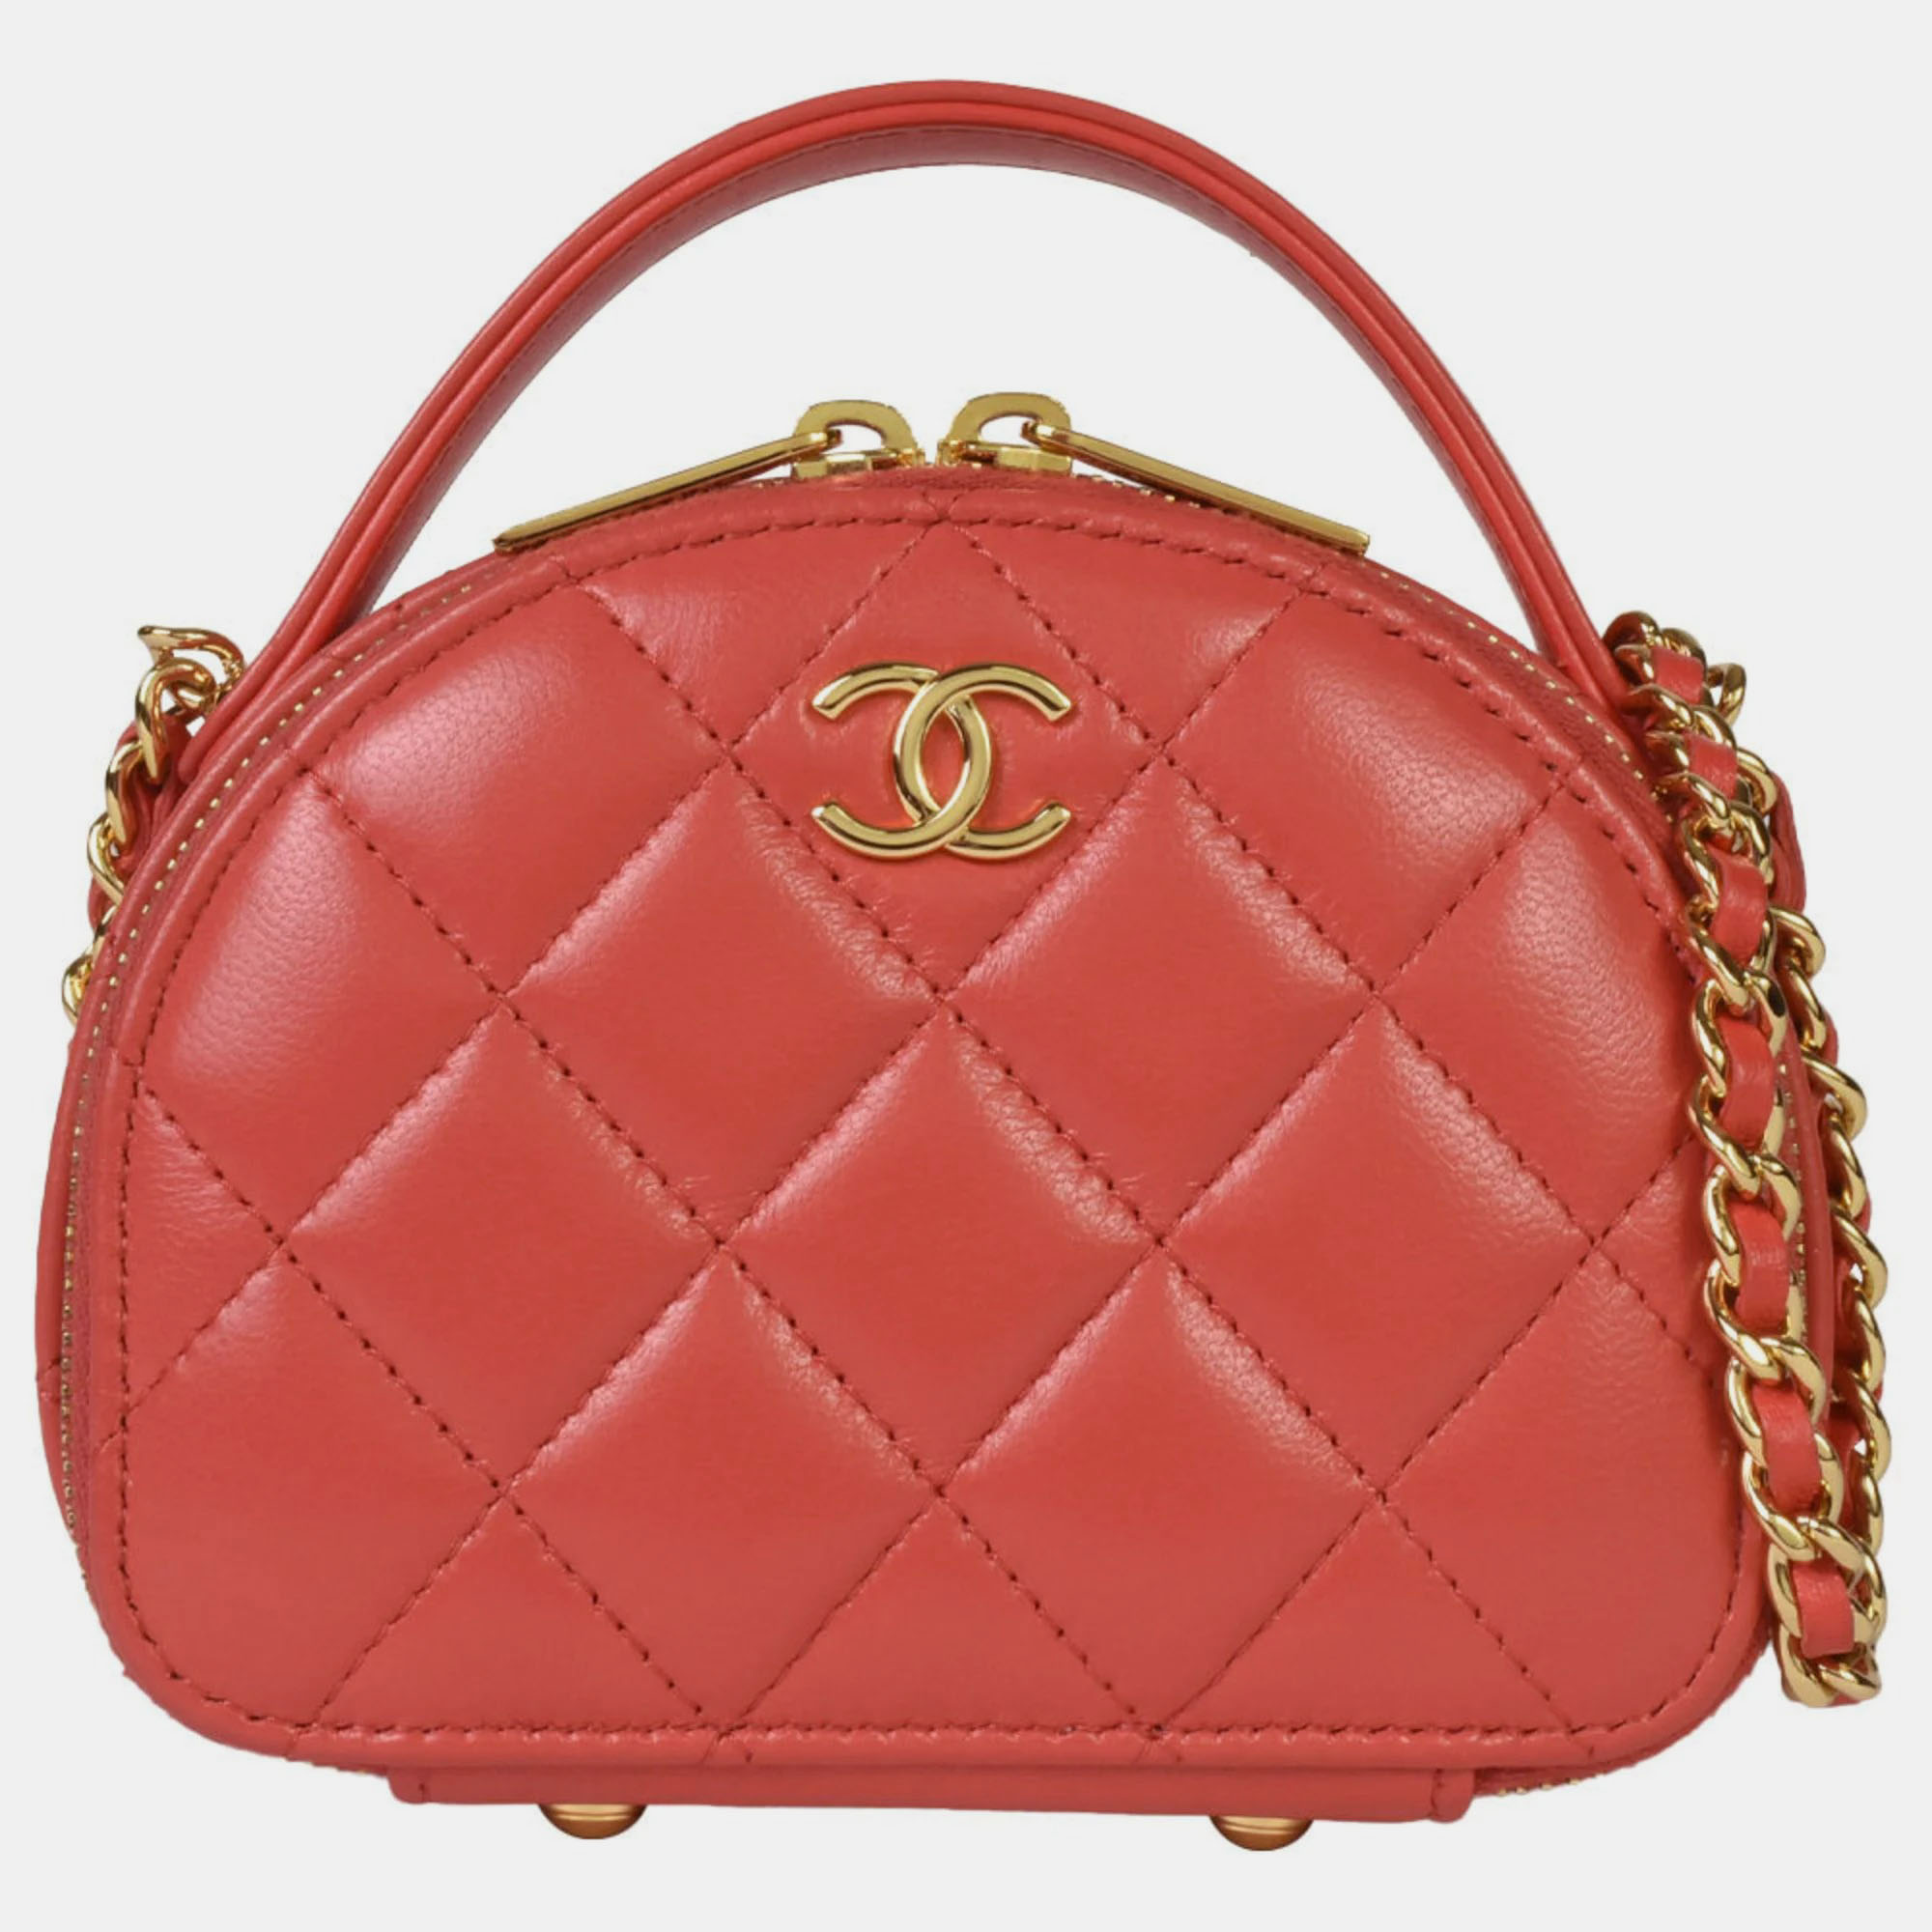 Chanel red lambskin chic riviera top handle bag